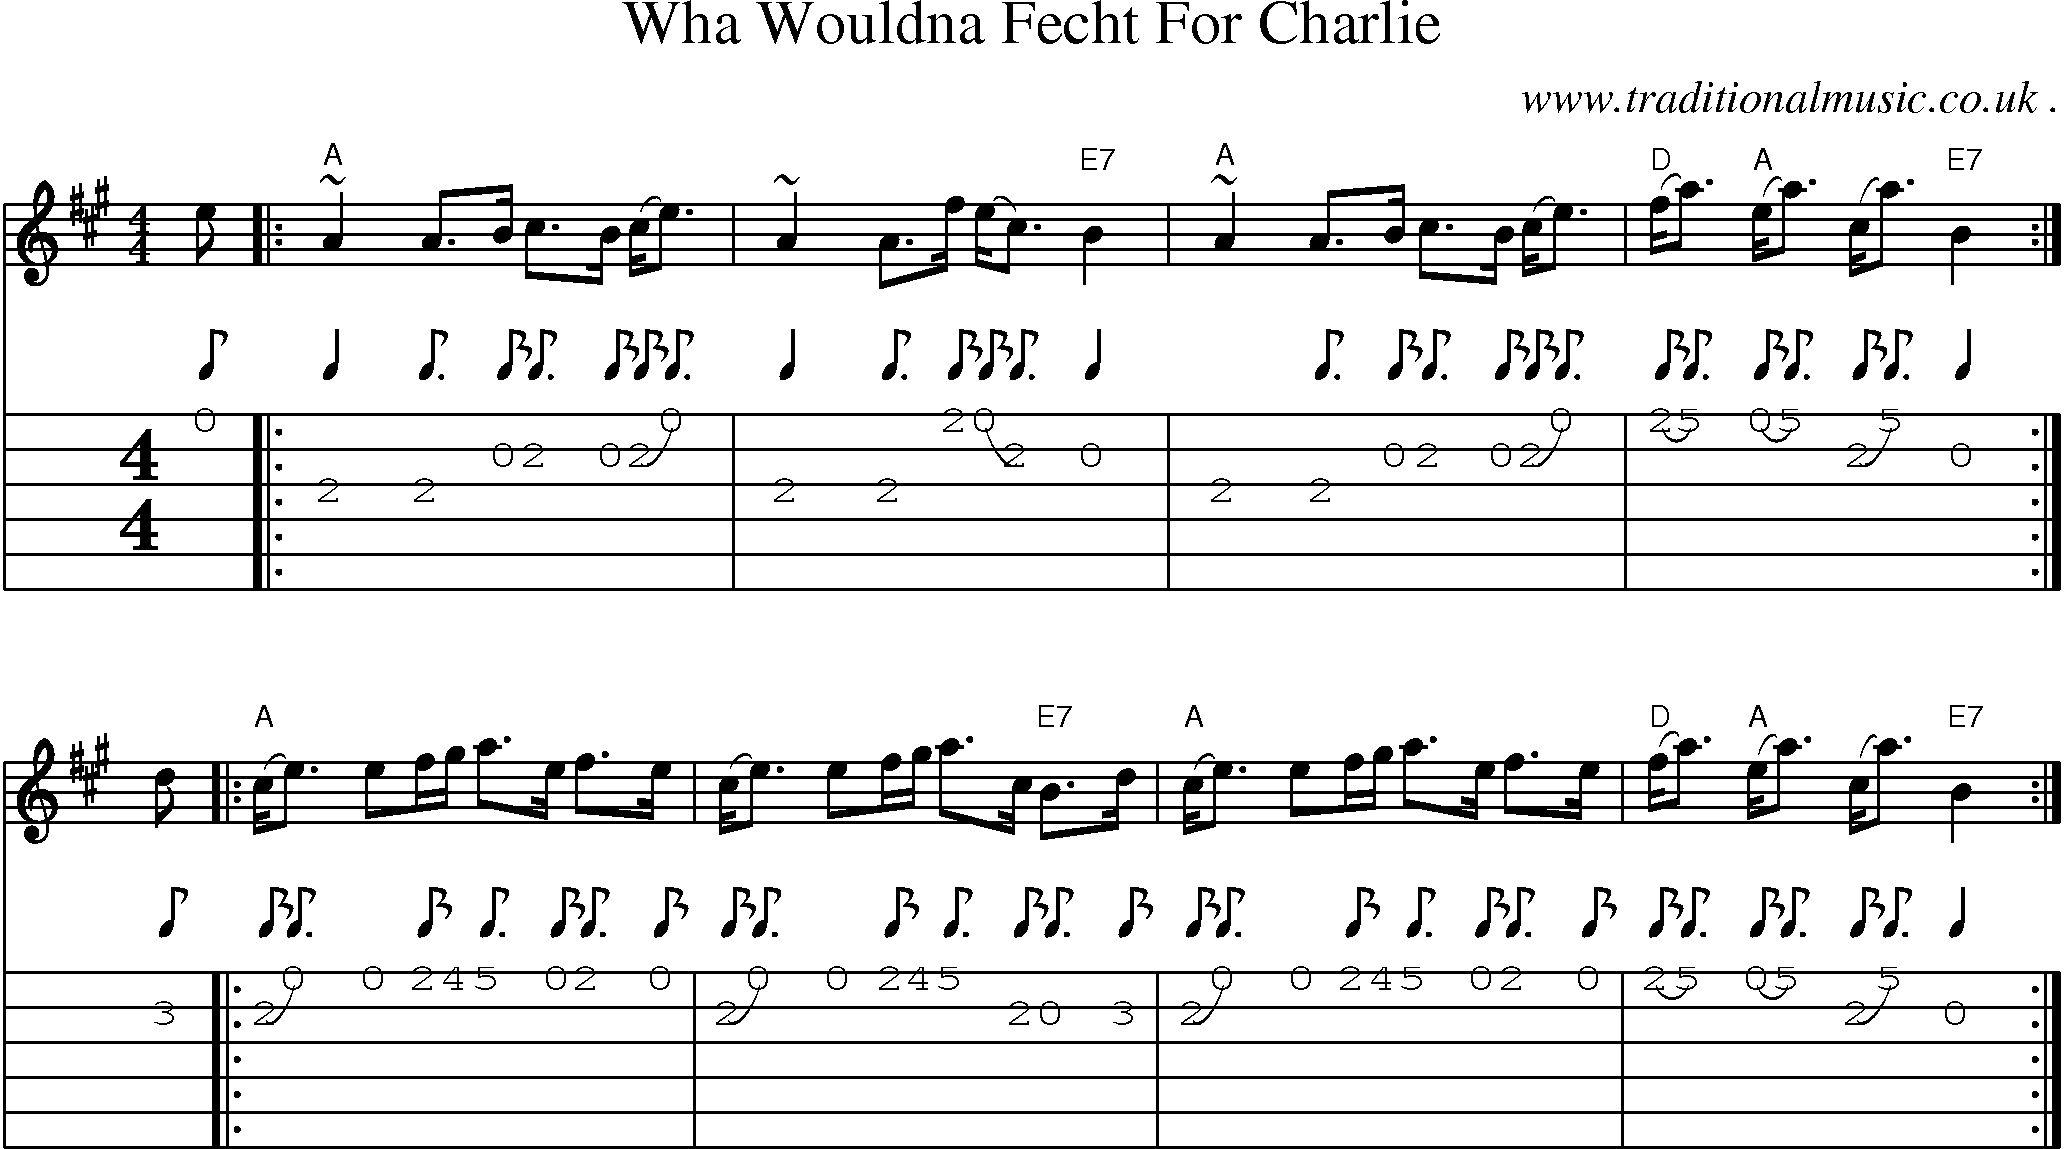 Sheet-music  score, Chords and Guitar Tabs for Wha Wouldna Fecht For Charlie